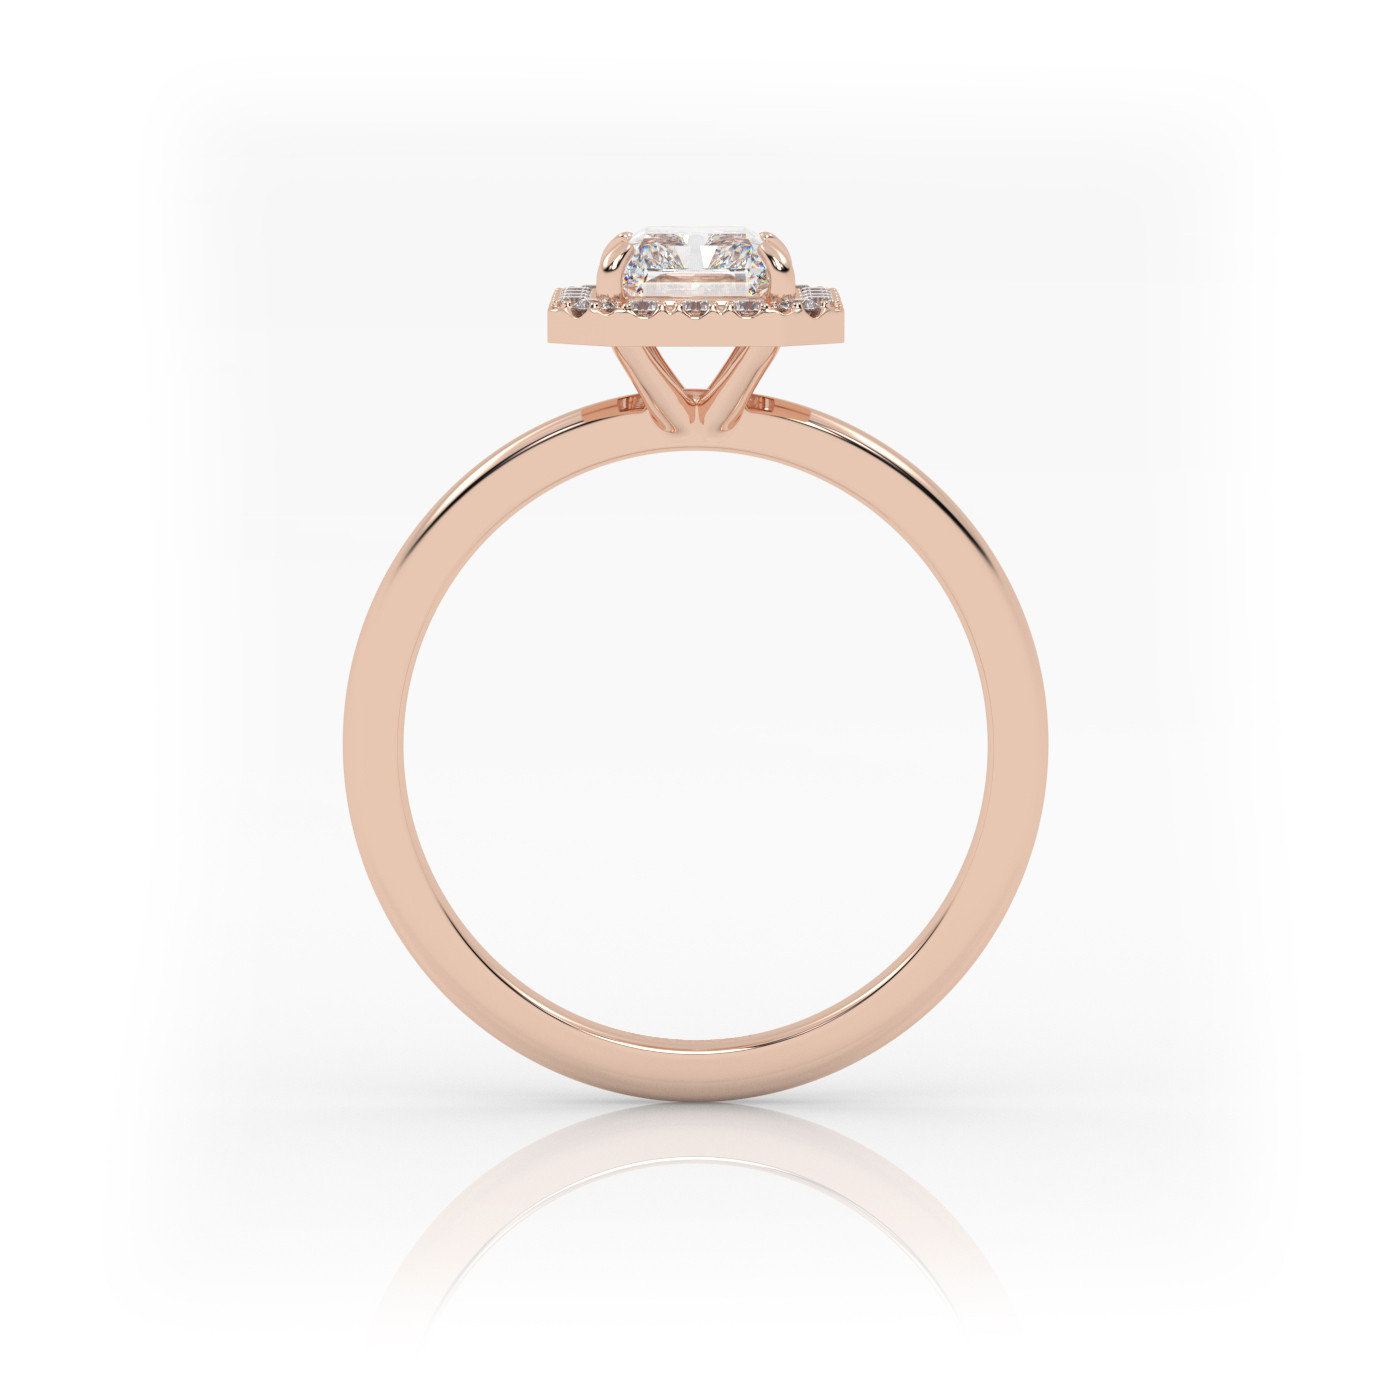 18K ROSE GOLD Radiant Diamond Cut Engagement Ring with Halo Style